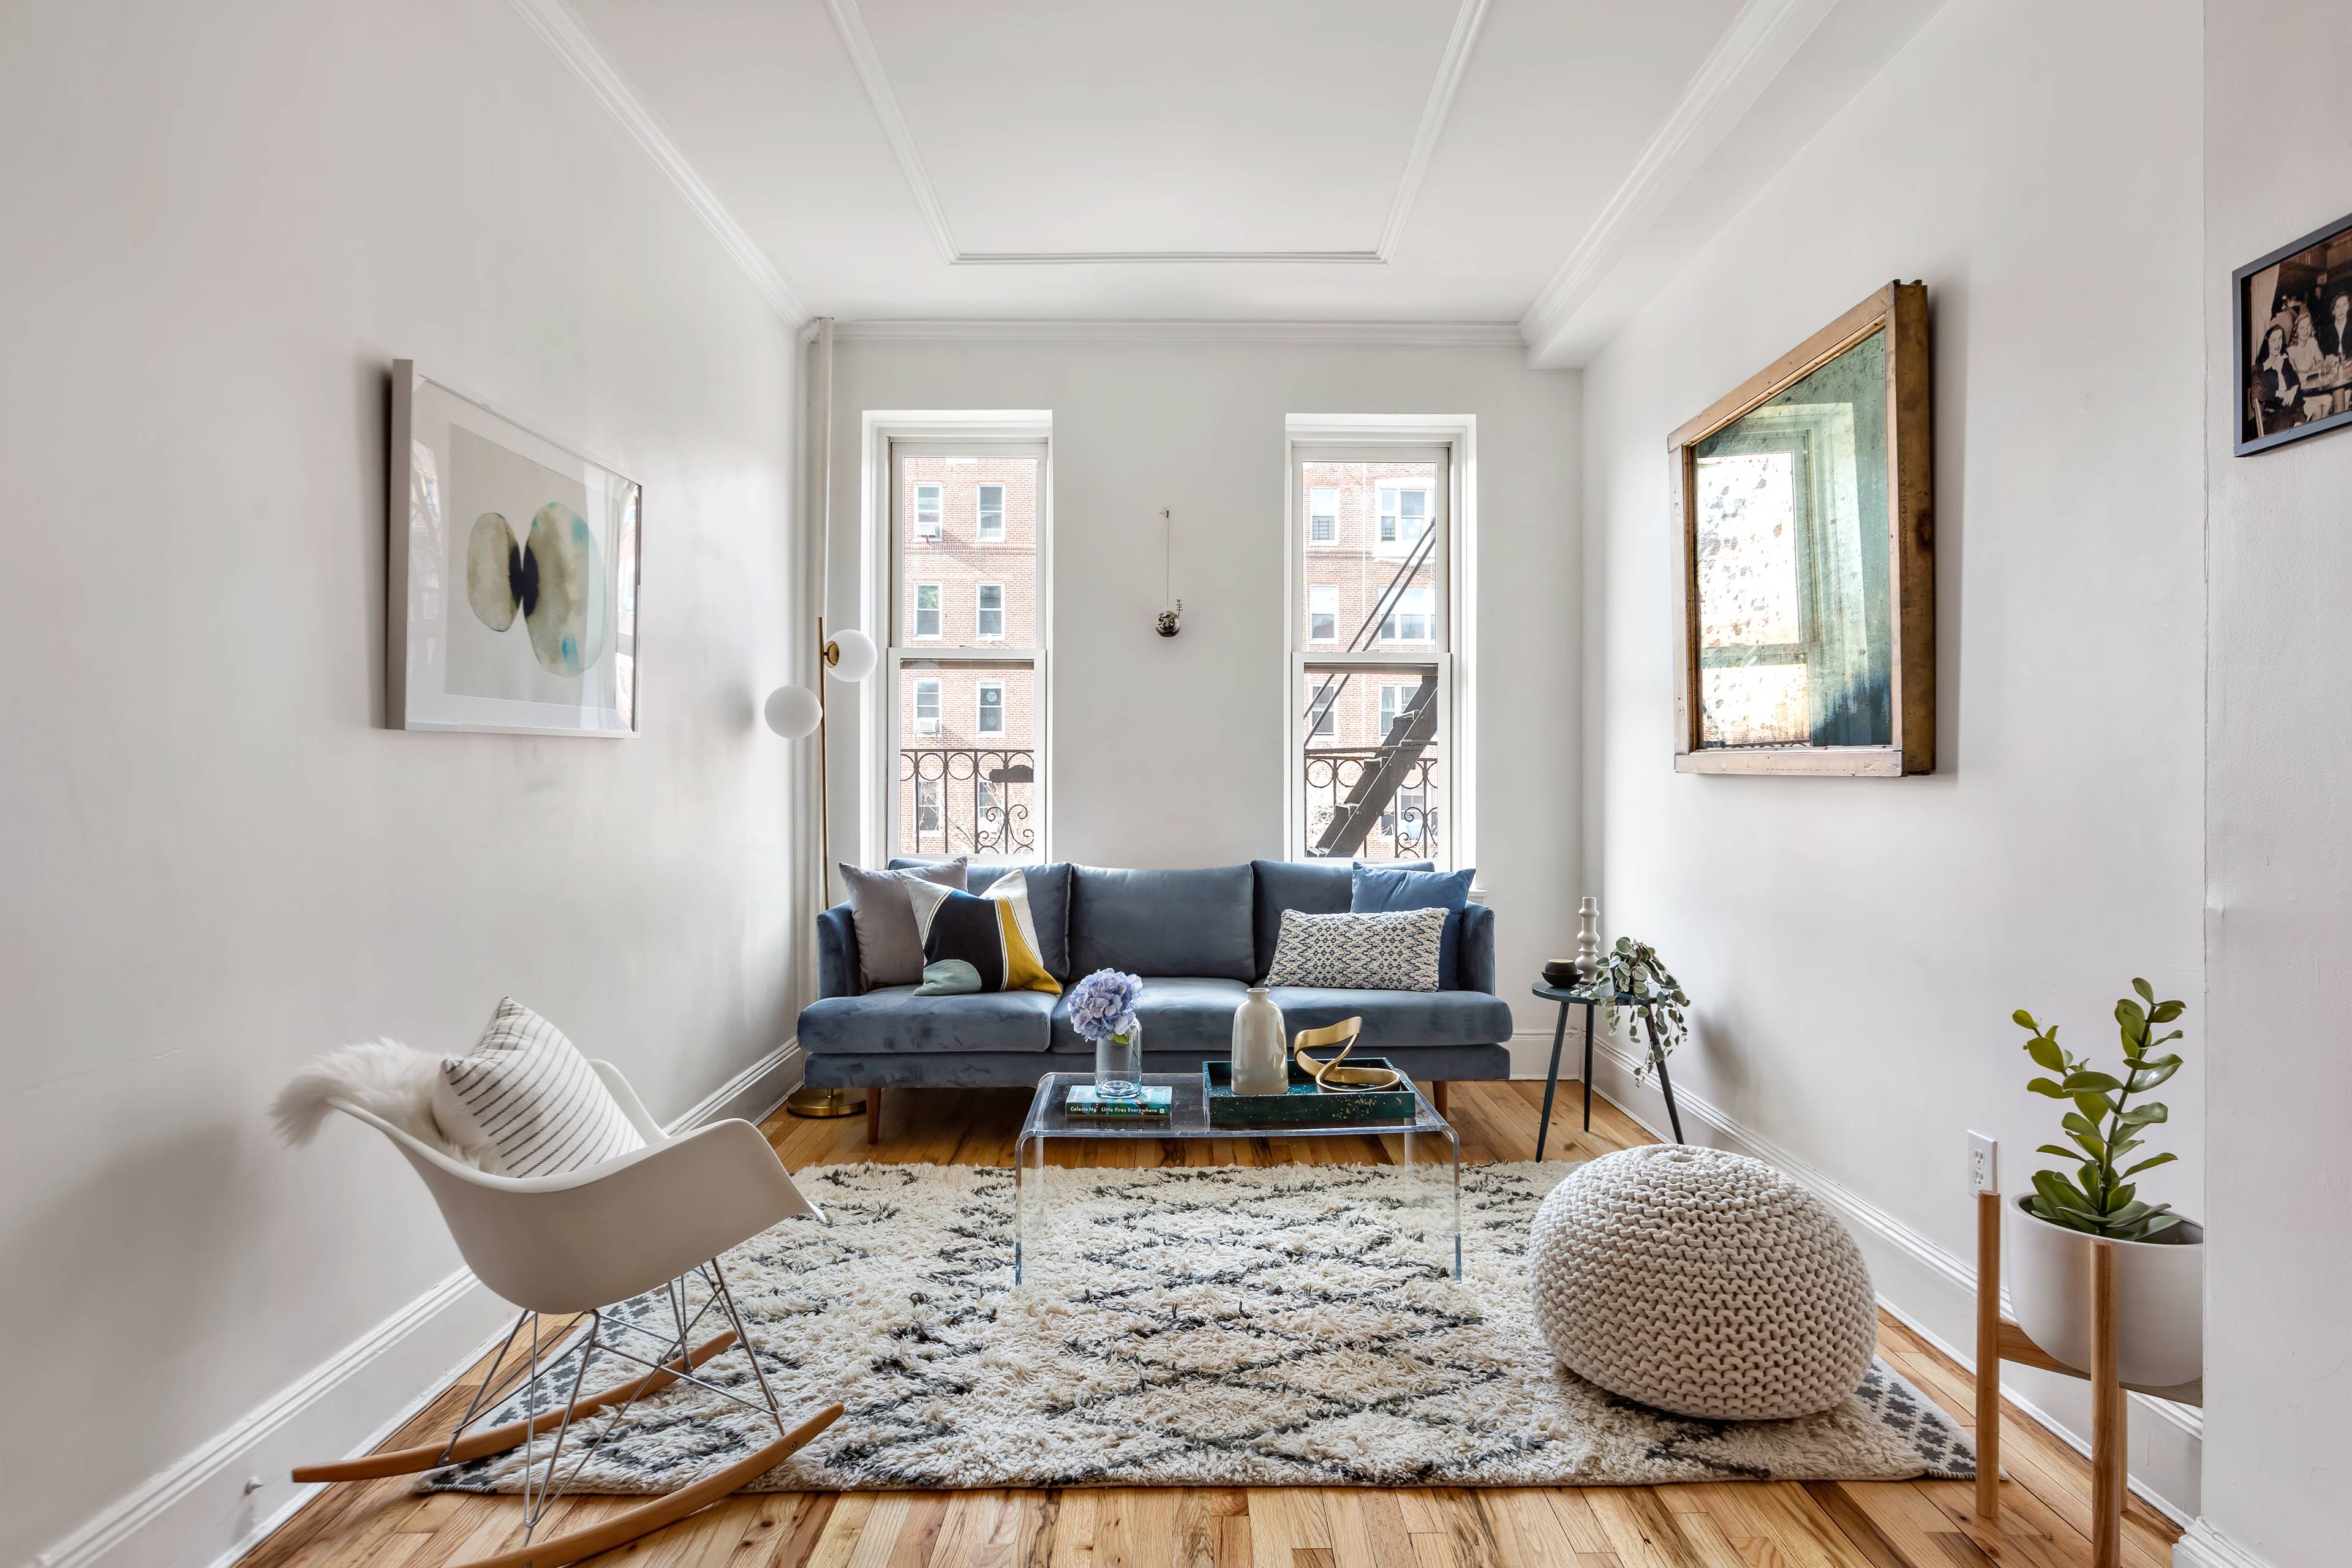 Perched on one of the prettiest blocks in Prospect Heights and just a few minutes from Prospect Park, this beautiful 2 bed 1 bath pre war co op is perfectly ...